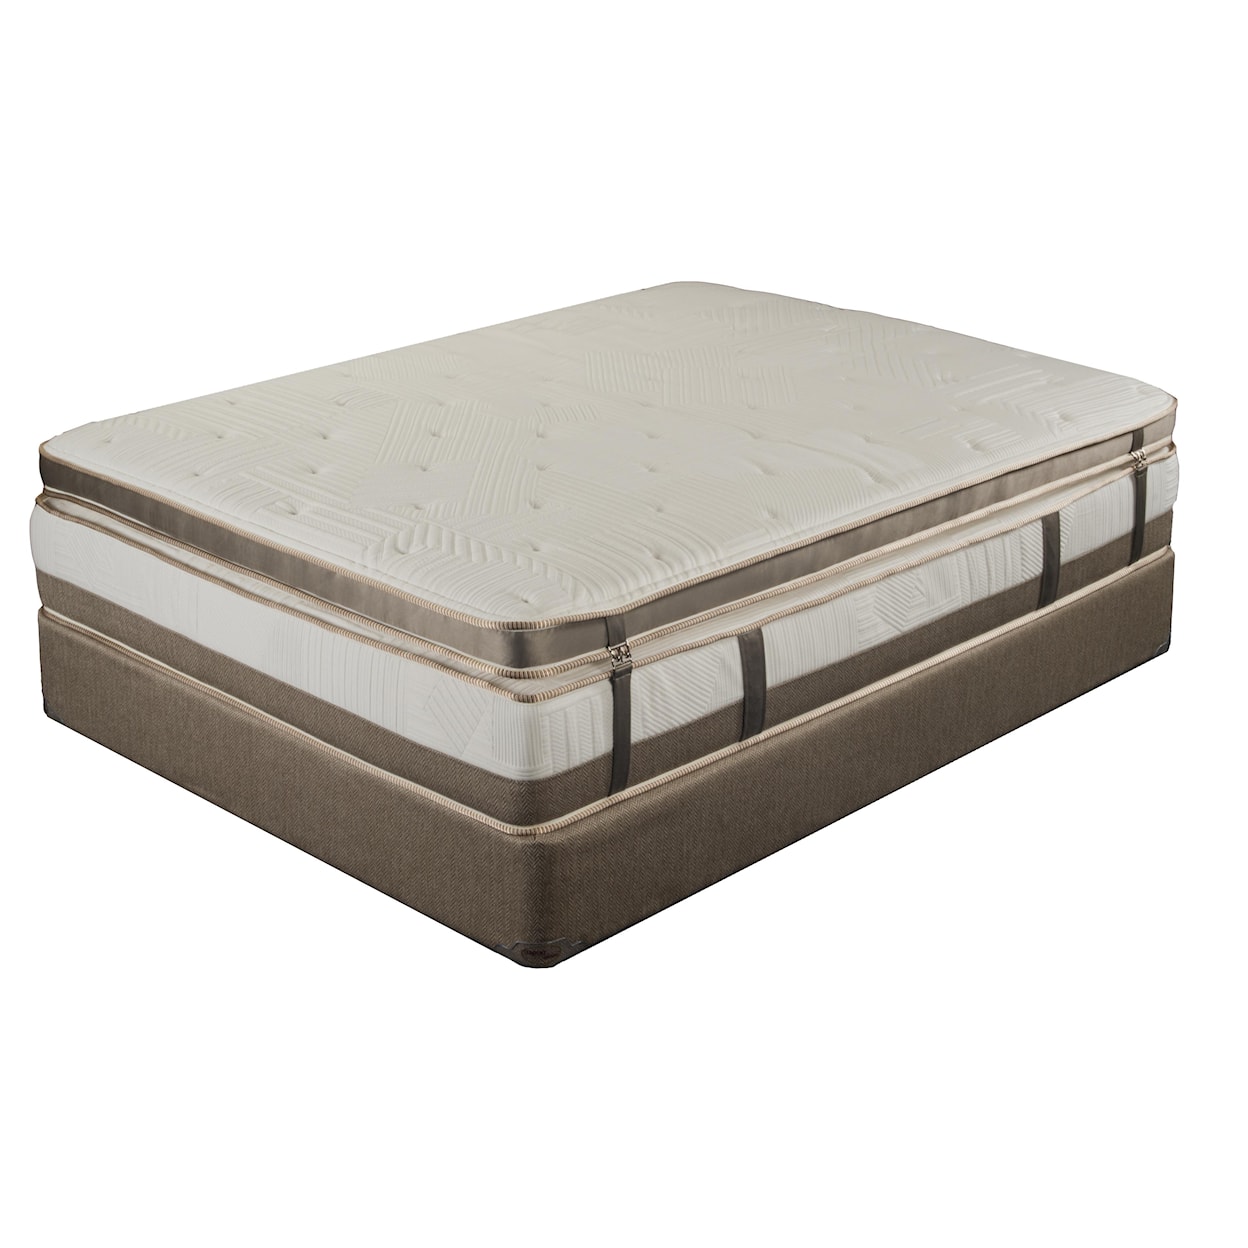 King Koil Extended Life 3300 Queen Mattress with Removable Top Layer